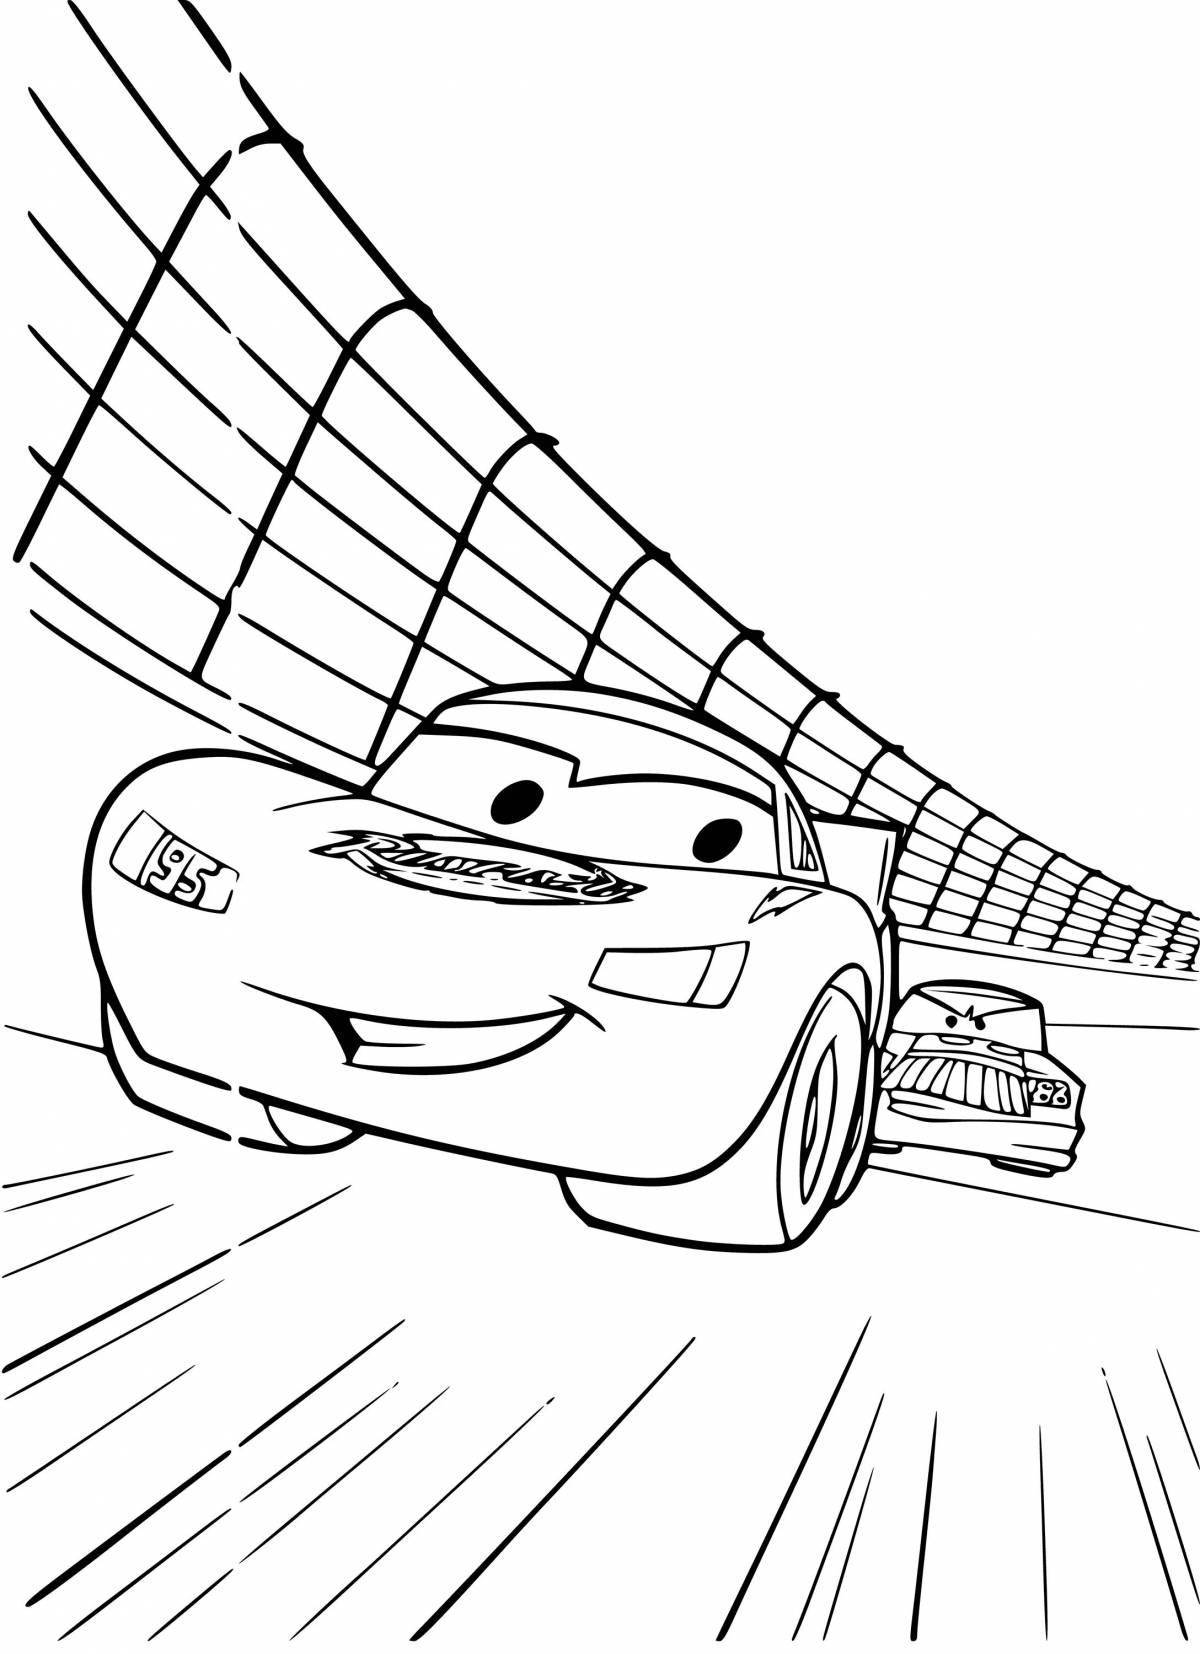 Lightning mcqueen's colorful car coloring book